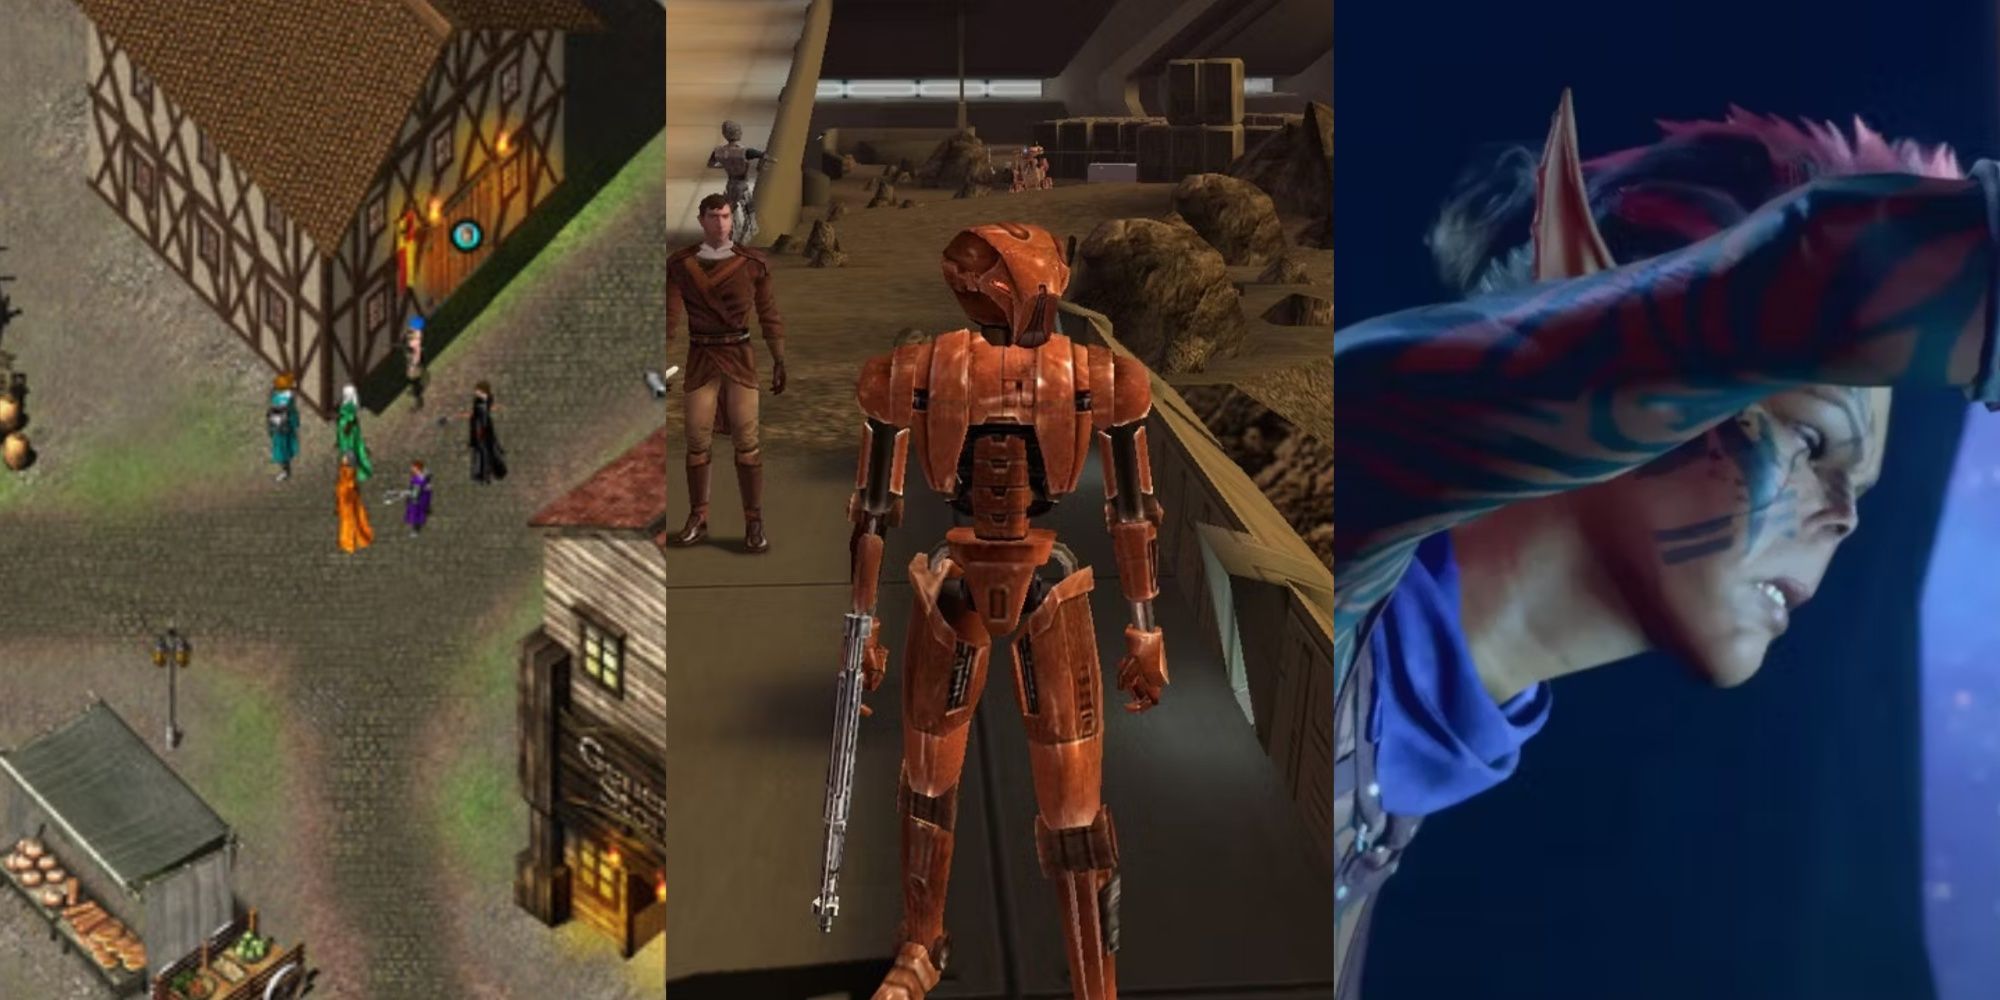 Split images of Knights of the Chalice, Star Wars Knights of the Old Republic, and Baldur’s Gate 3.